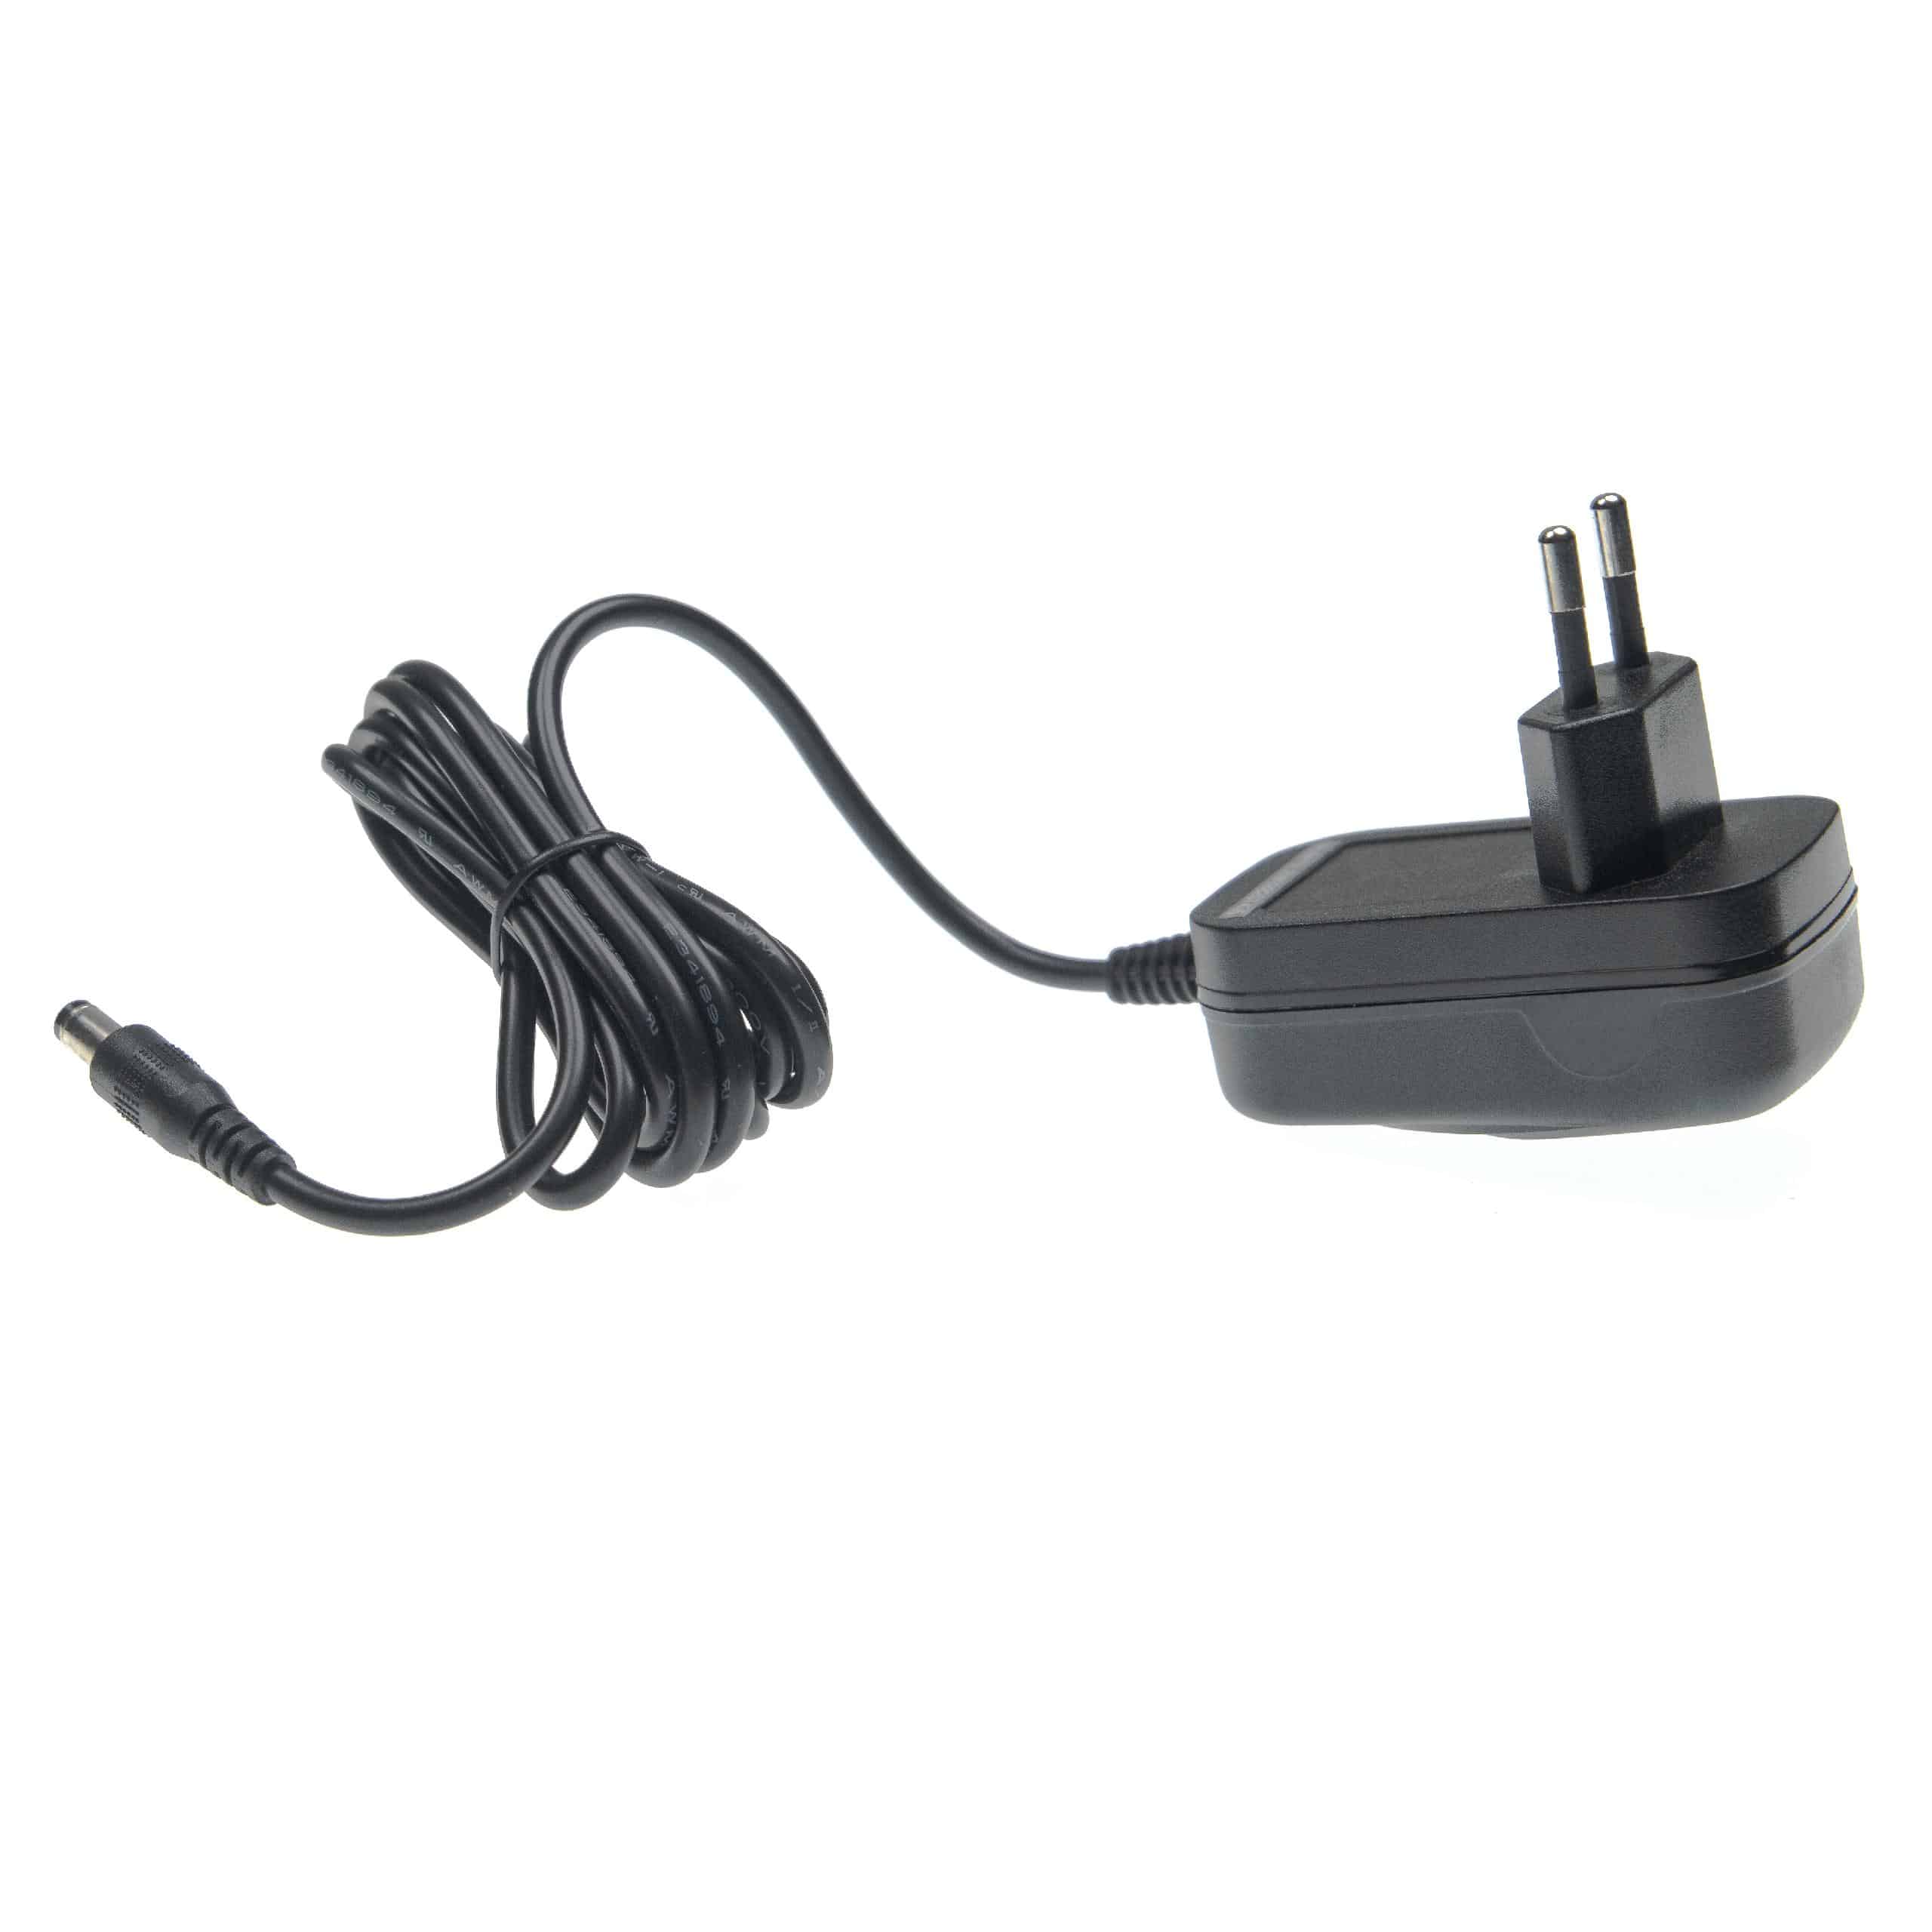 Mains Power Adapter suitable for Hyperice Hypervolt Massage Device - 26 V / 0.92 A 155 cm